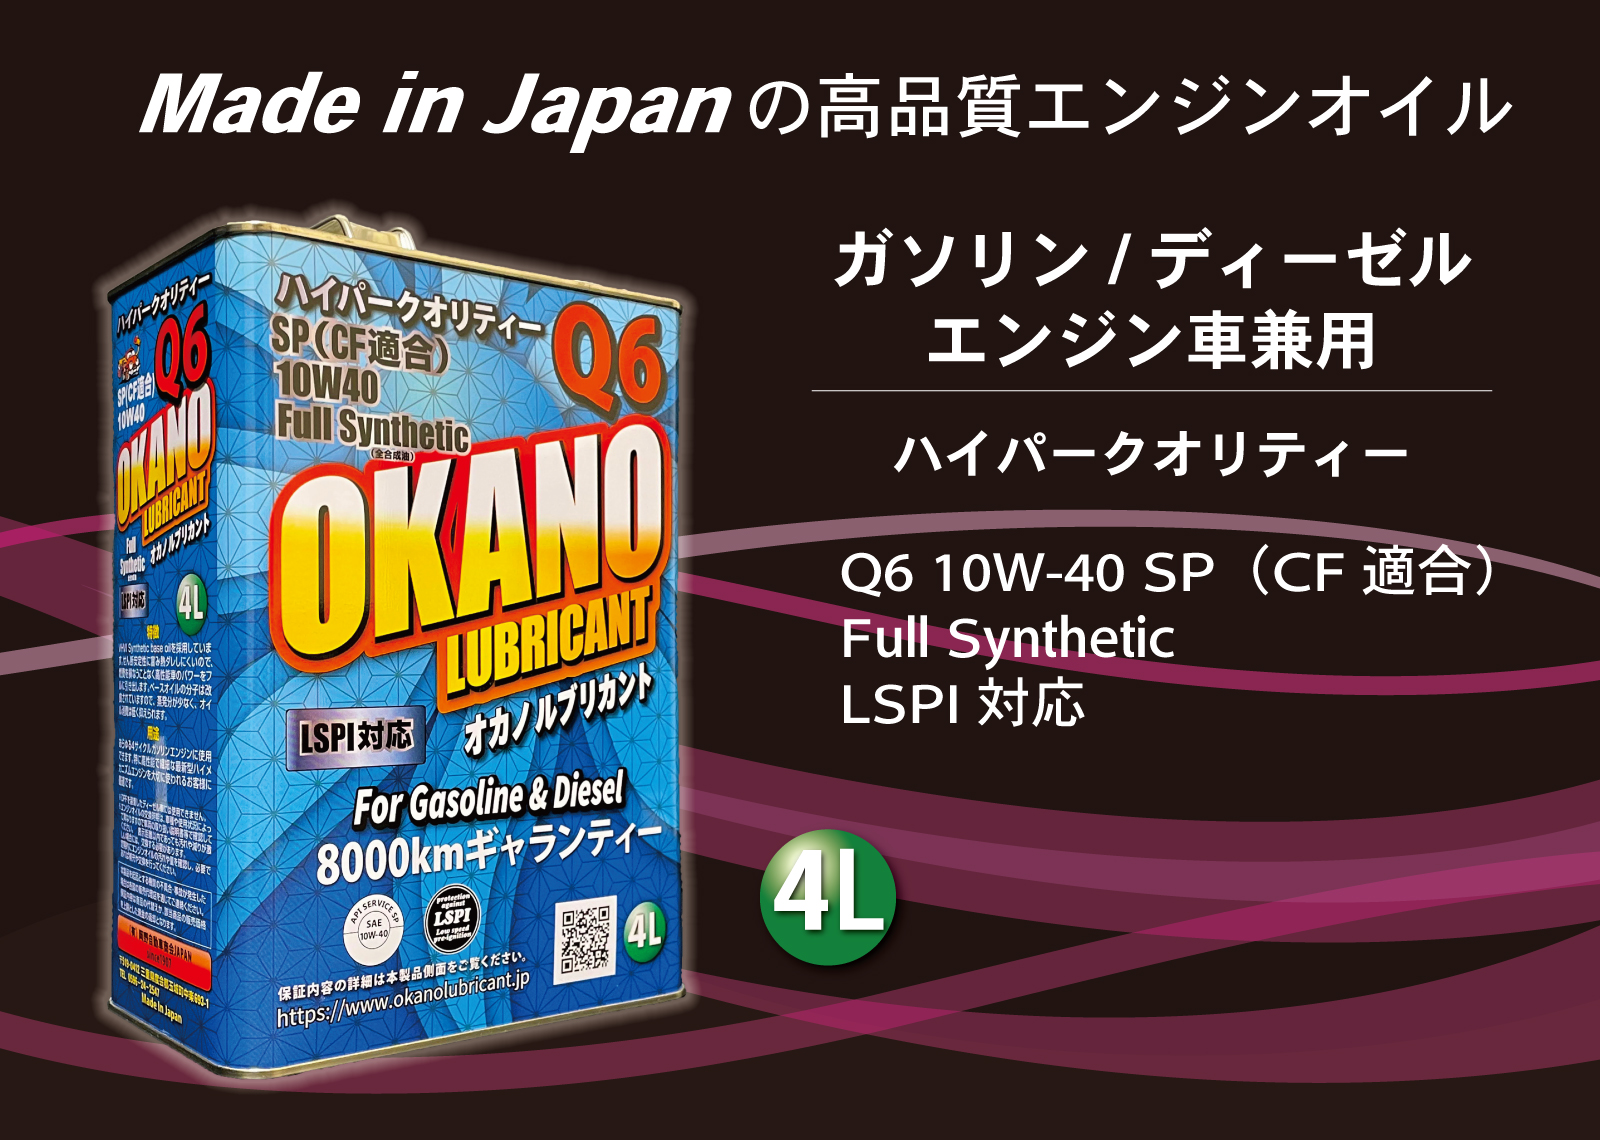 OKANO LUBRICANT Q6 10W-40 SP（CF） Full Synthetic LSPI